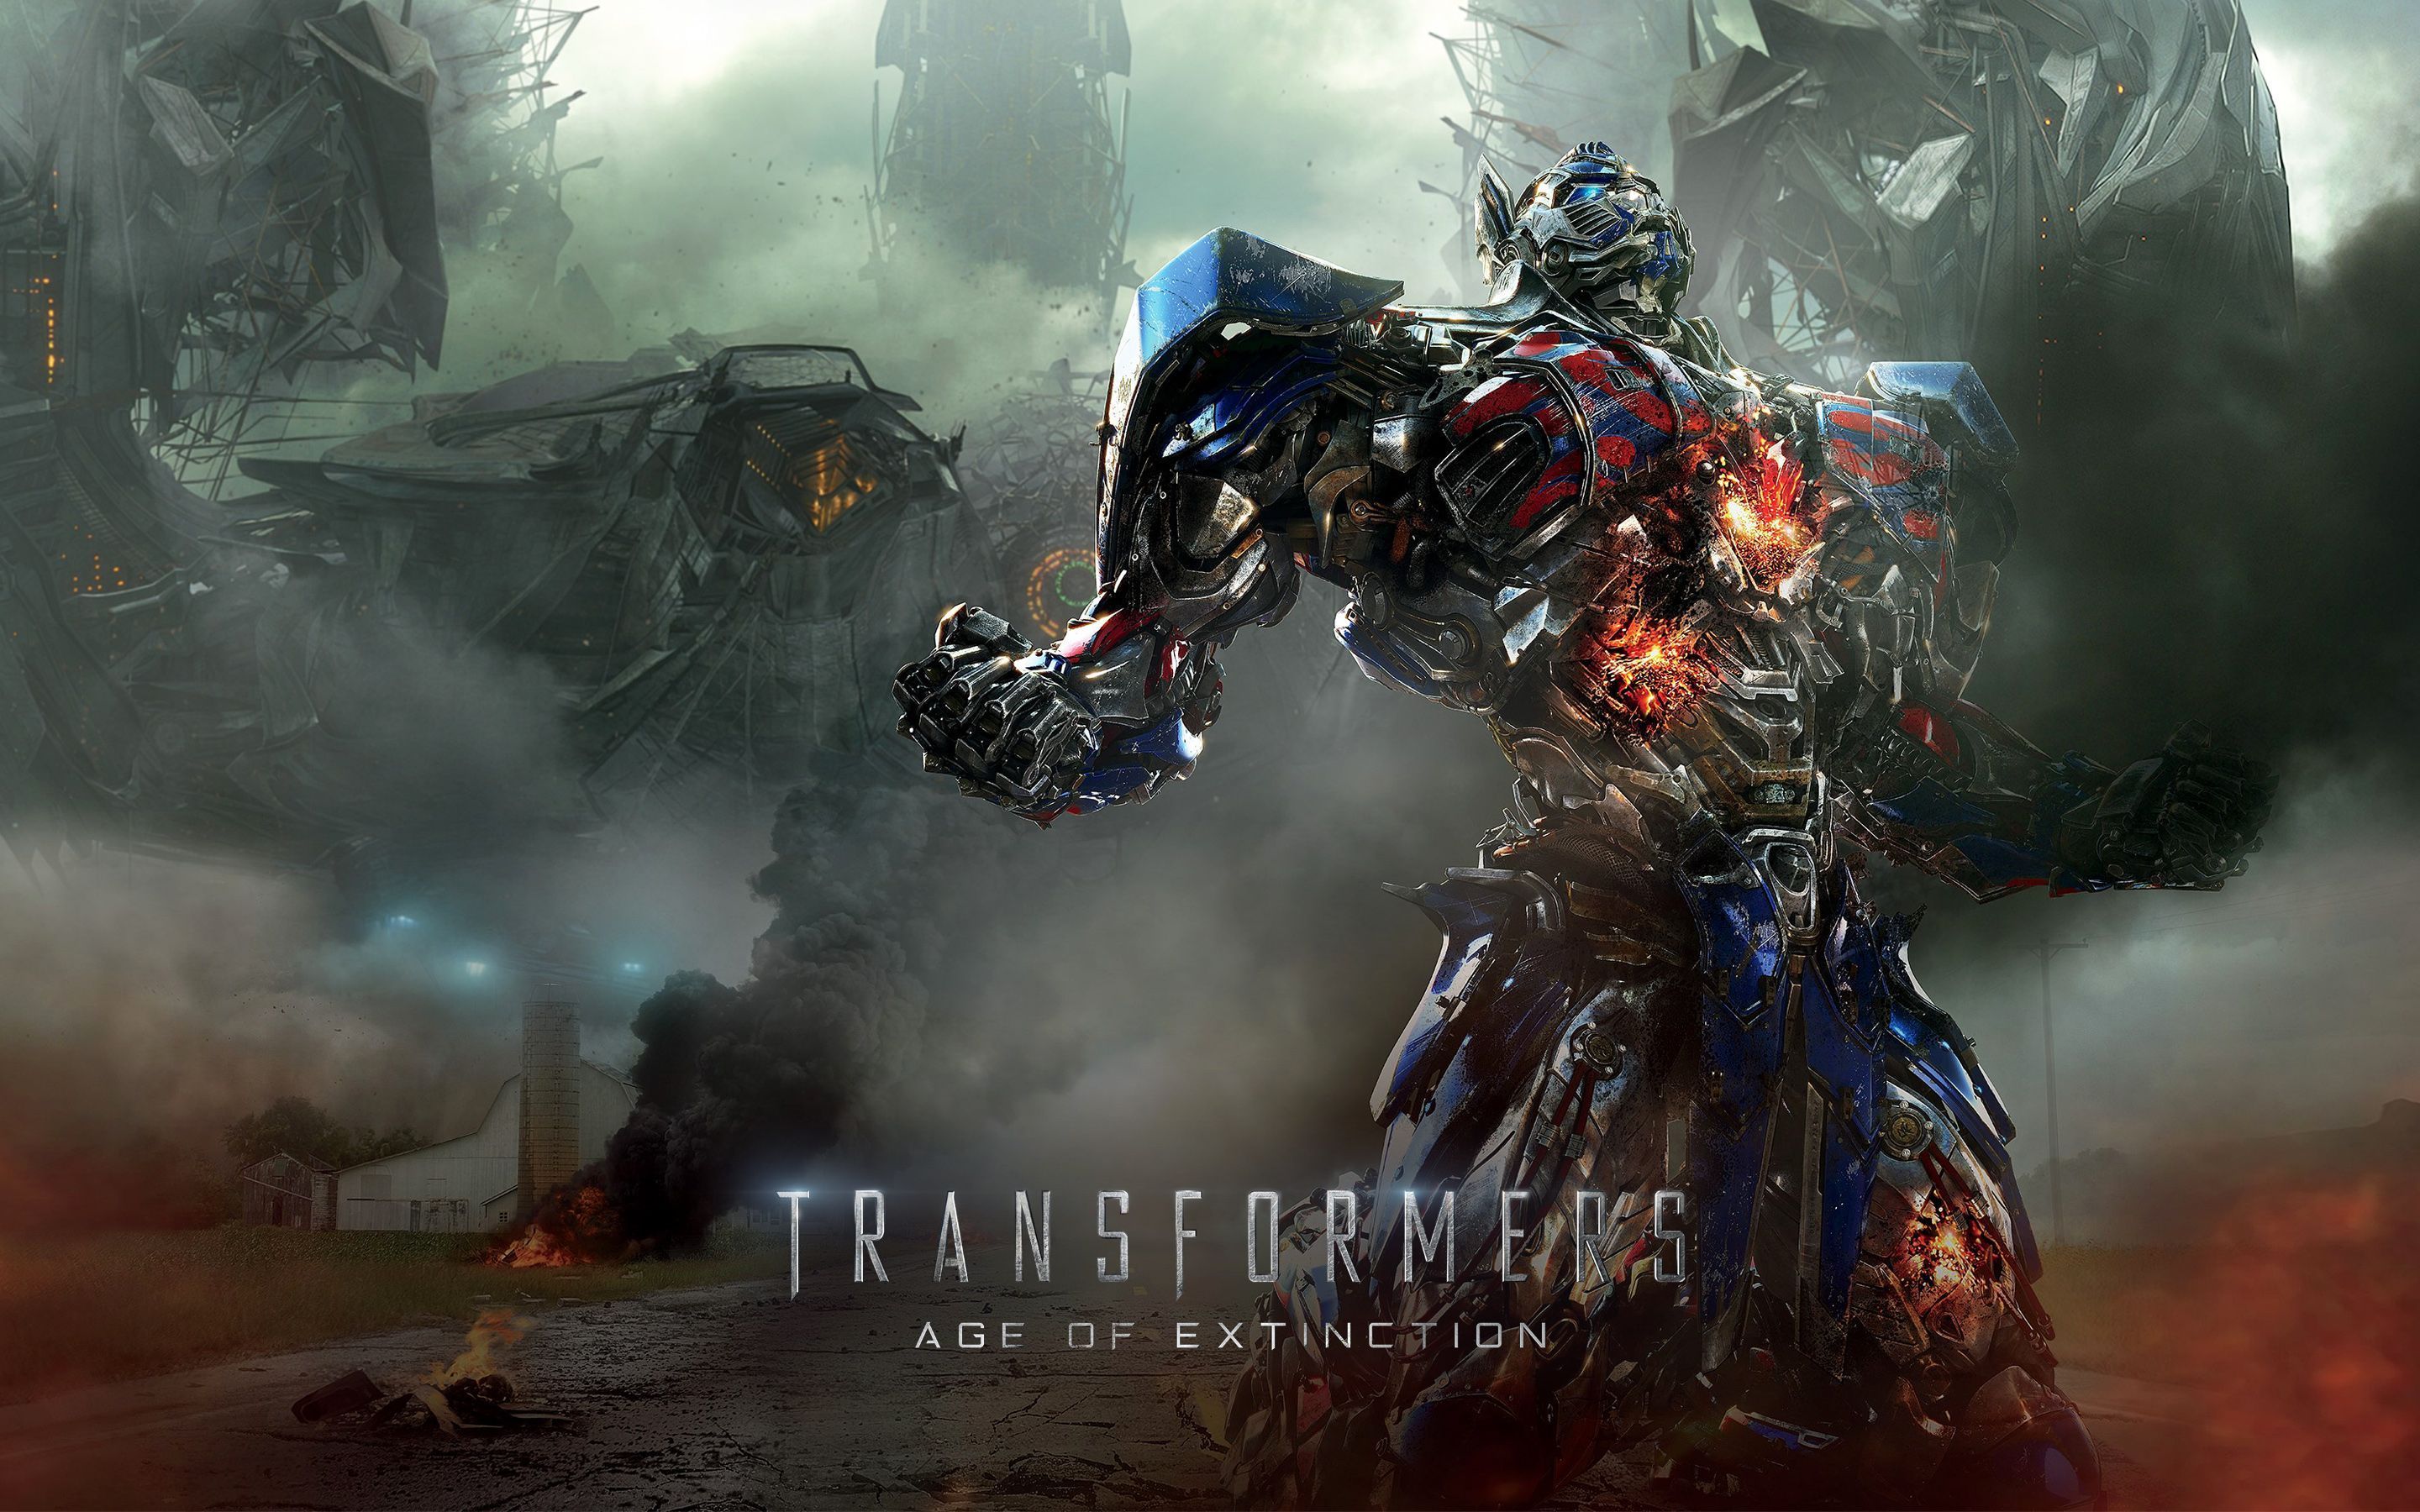 Transformers 4 Age of Extinction 2014 Wallpapers HD Backgrounds